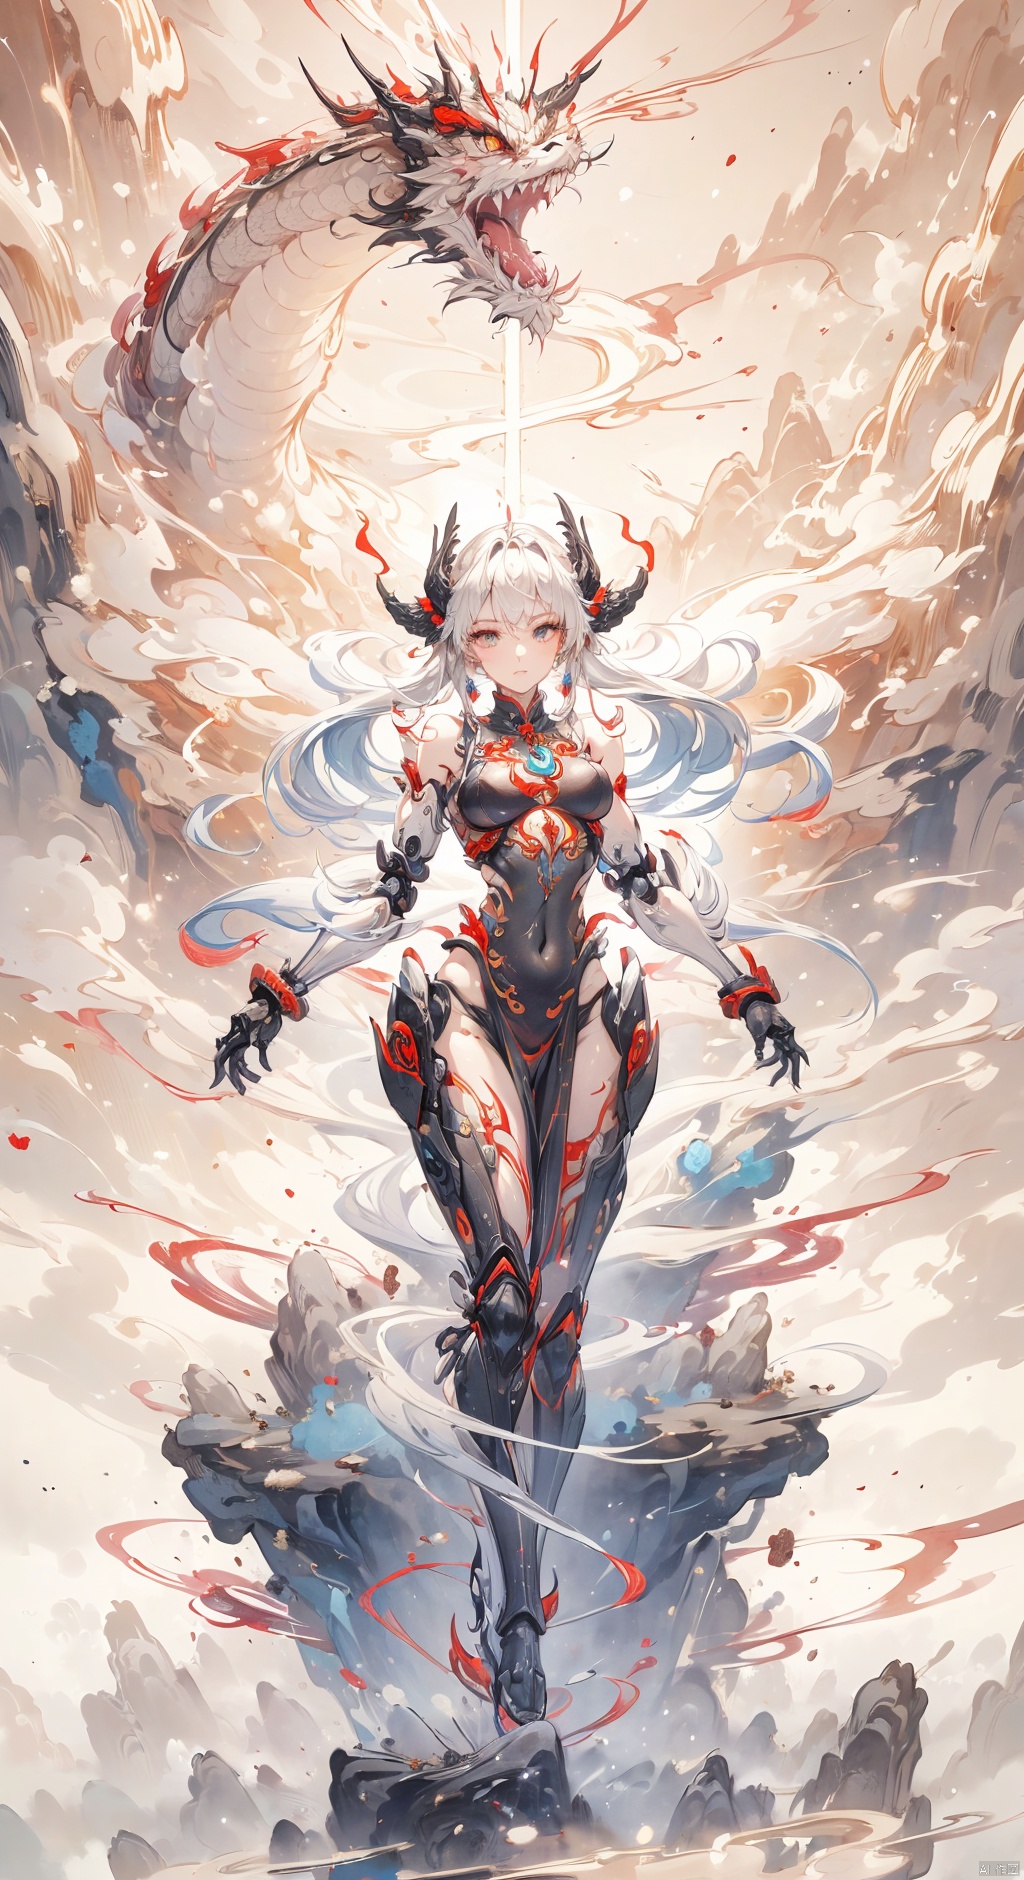  The game -Tower of Fantasy, the character -NEMESIS, (a half-human, half-mechanical beauty: 1.4), (wearing a black combat soft armor: 1.2), soft armor is inset with red, white, and gold decorations, both highlight her half-human, half-mechanical characteristics, but also give her a mysterious charm. Her long hair hung loose behind her, flowing gently, in stark contrast to the grim style of the outfit. There was a firmness in her eyes, as if she were ready to fight for justice whenever and wherever she could, eastern_dragon, Dragon and girl